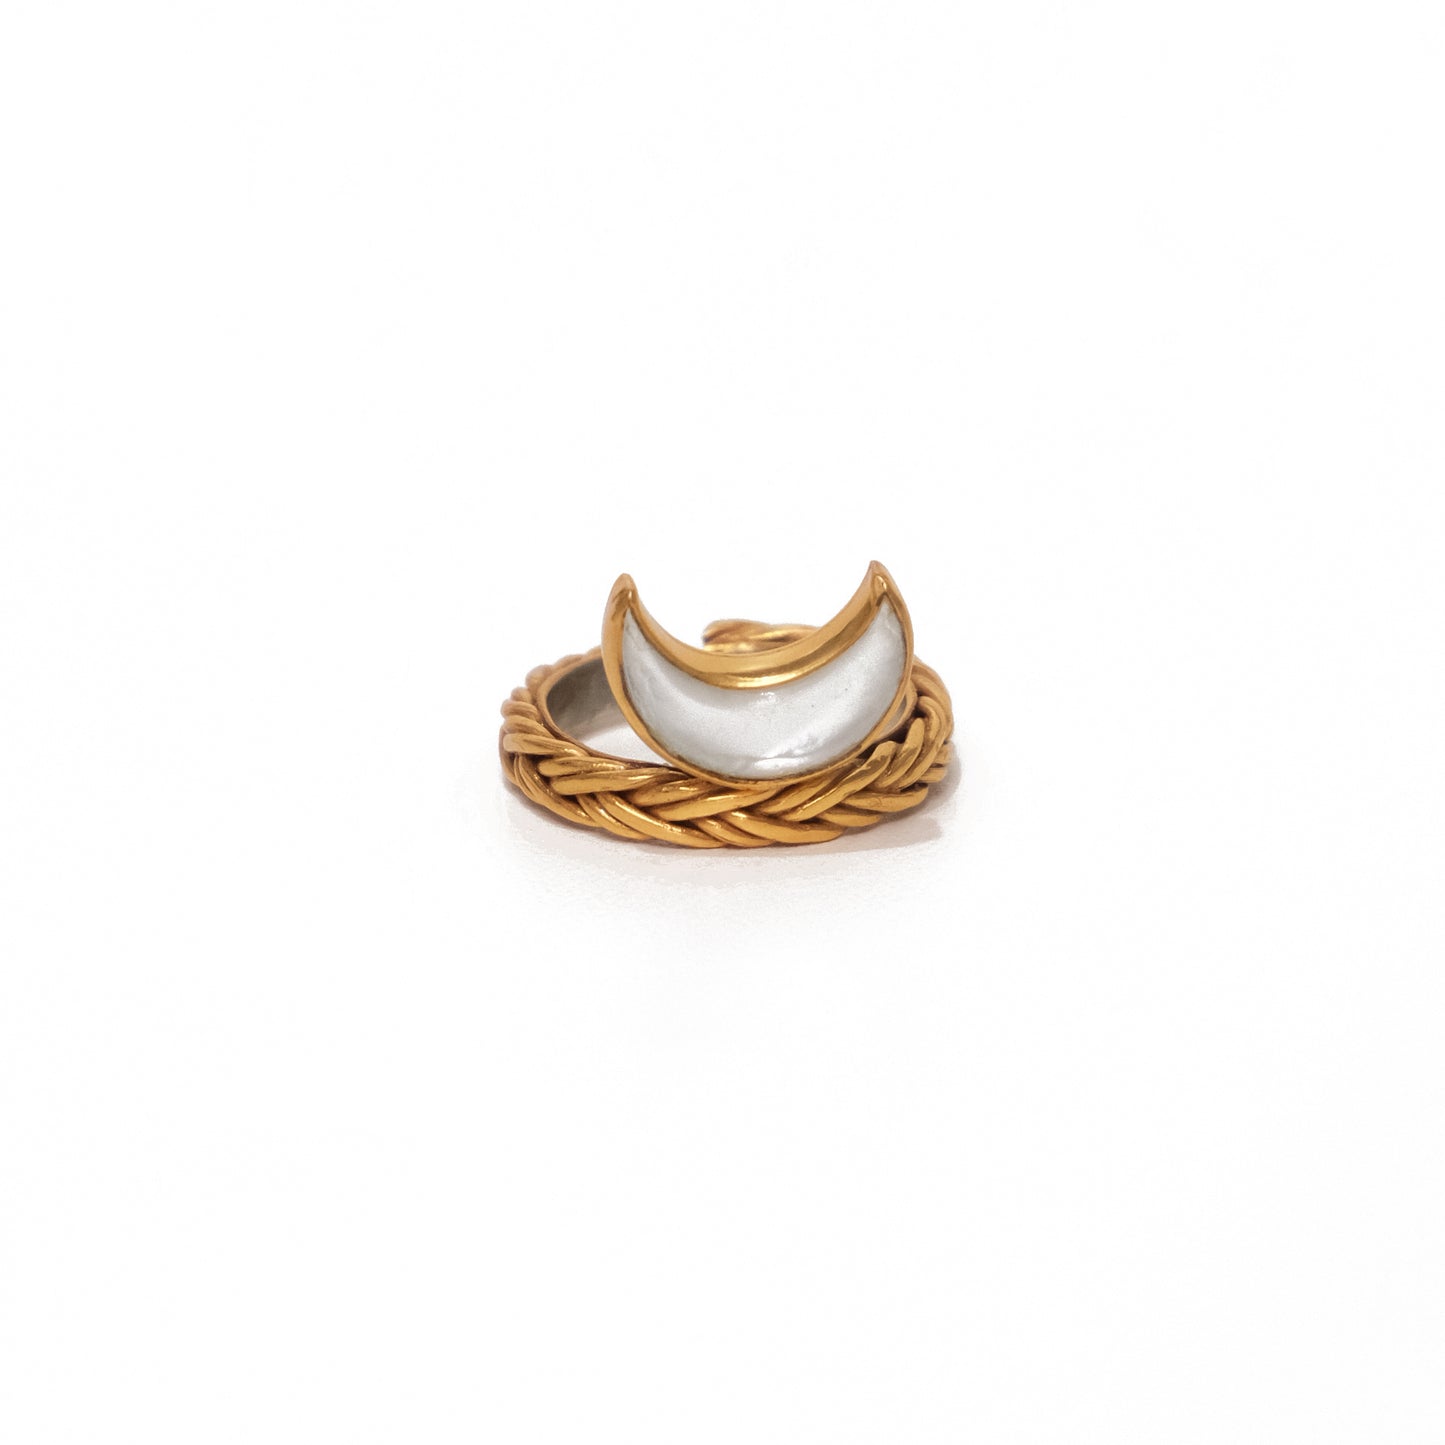 The BRAIDED LUNA Ring